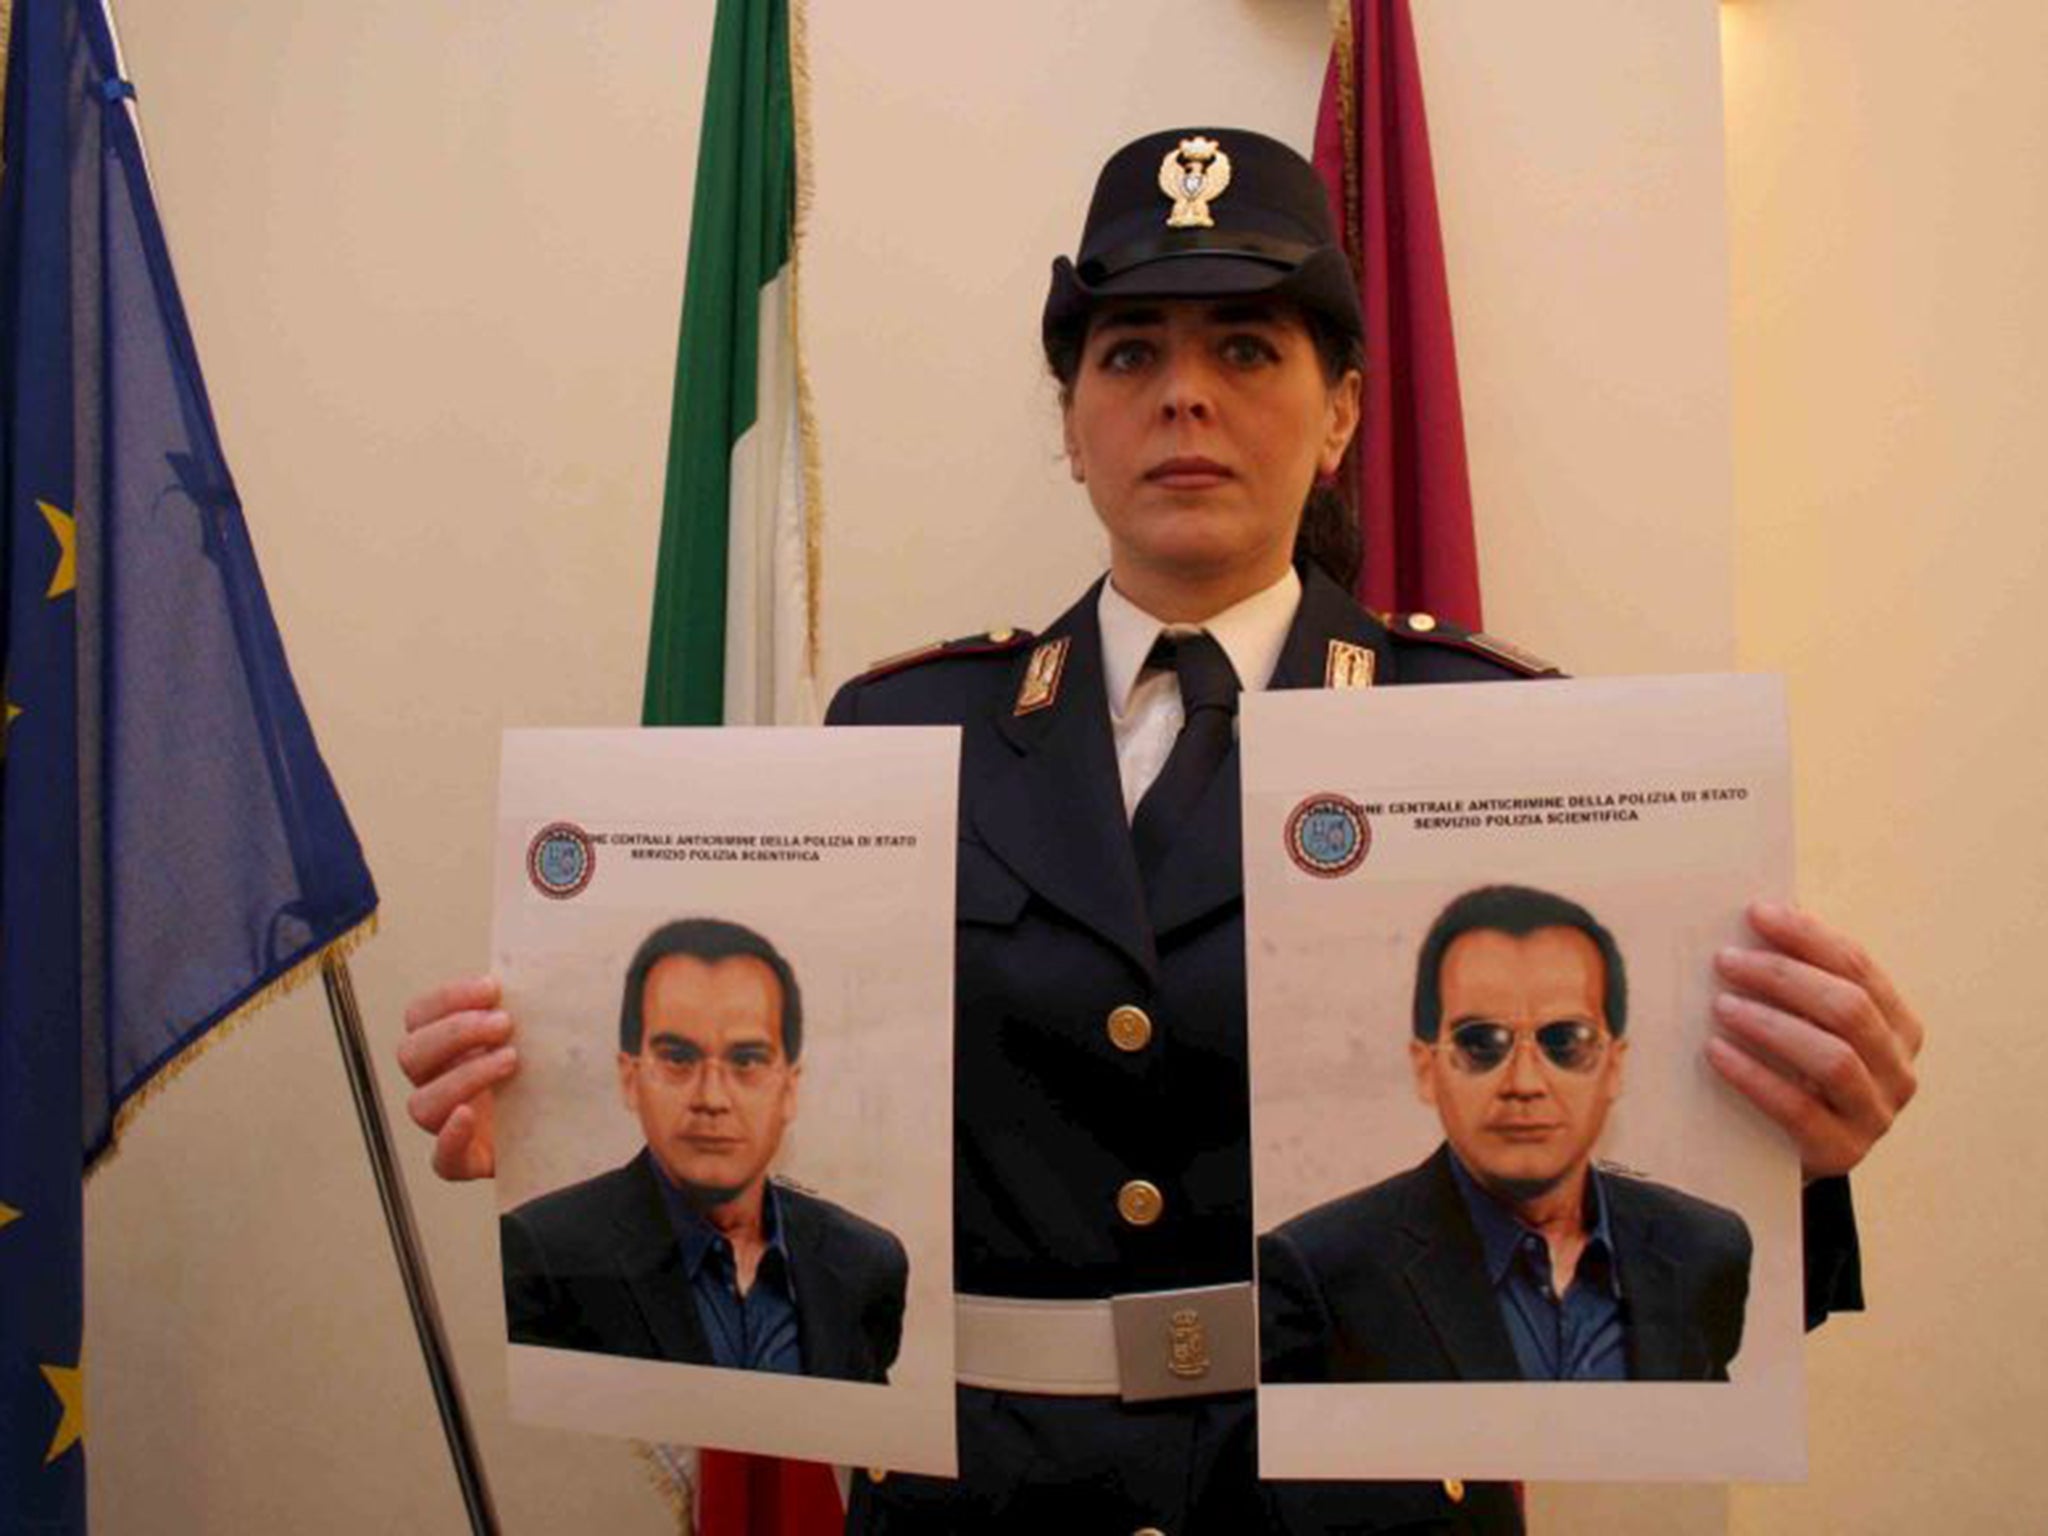 A police officer shows two pictures of Matteo Messina Denaro, nicknamed Diabolik, during a press conference in Palermo, Sicily (EPA)